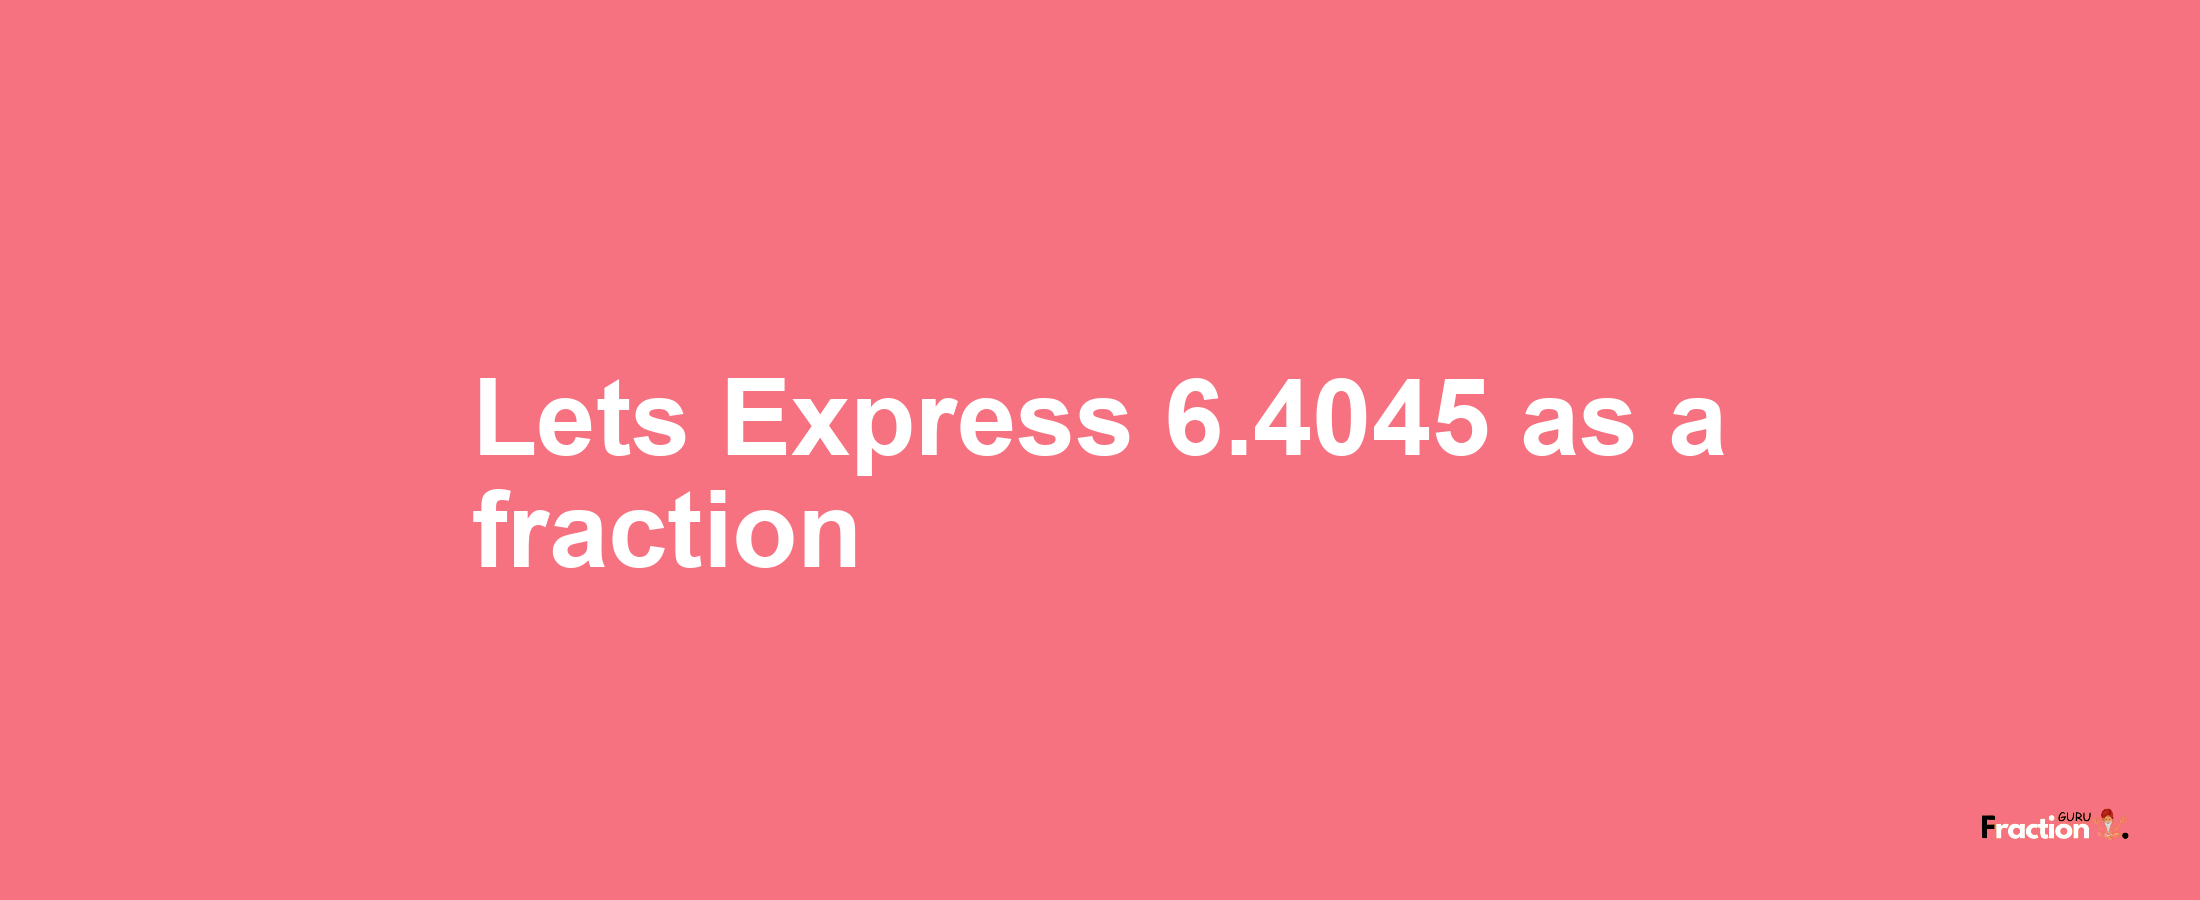 Lets Express 6.4045 as afraction